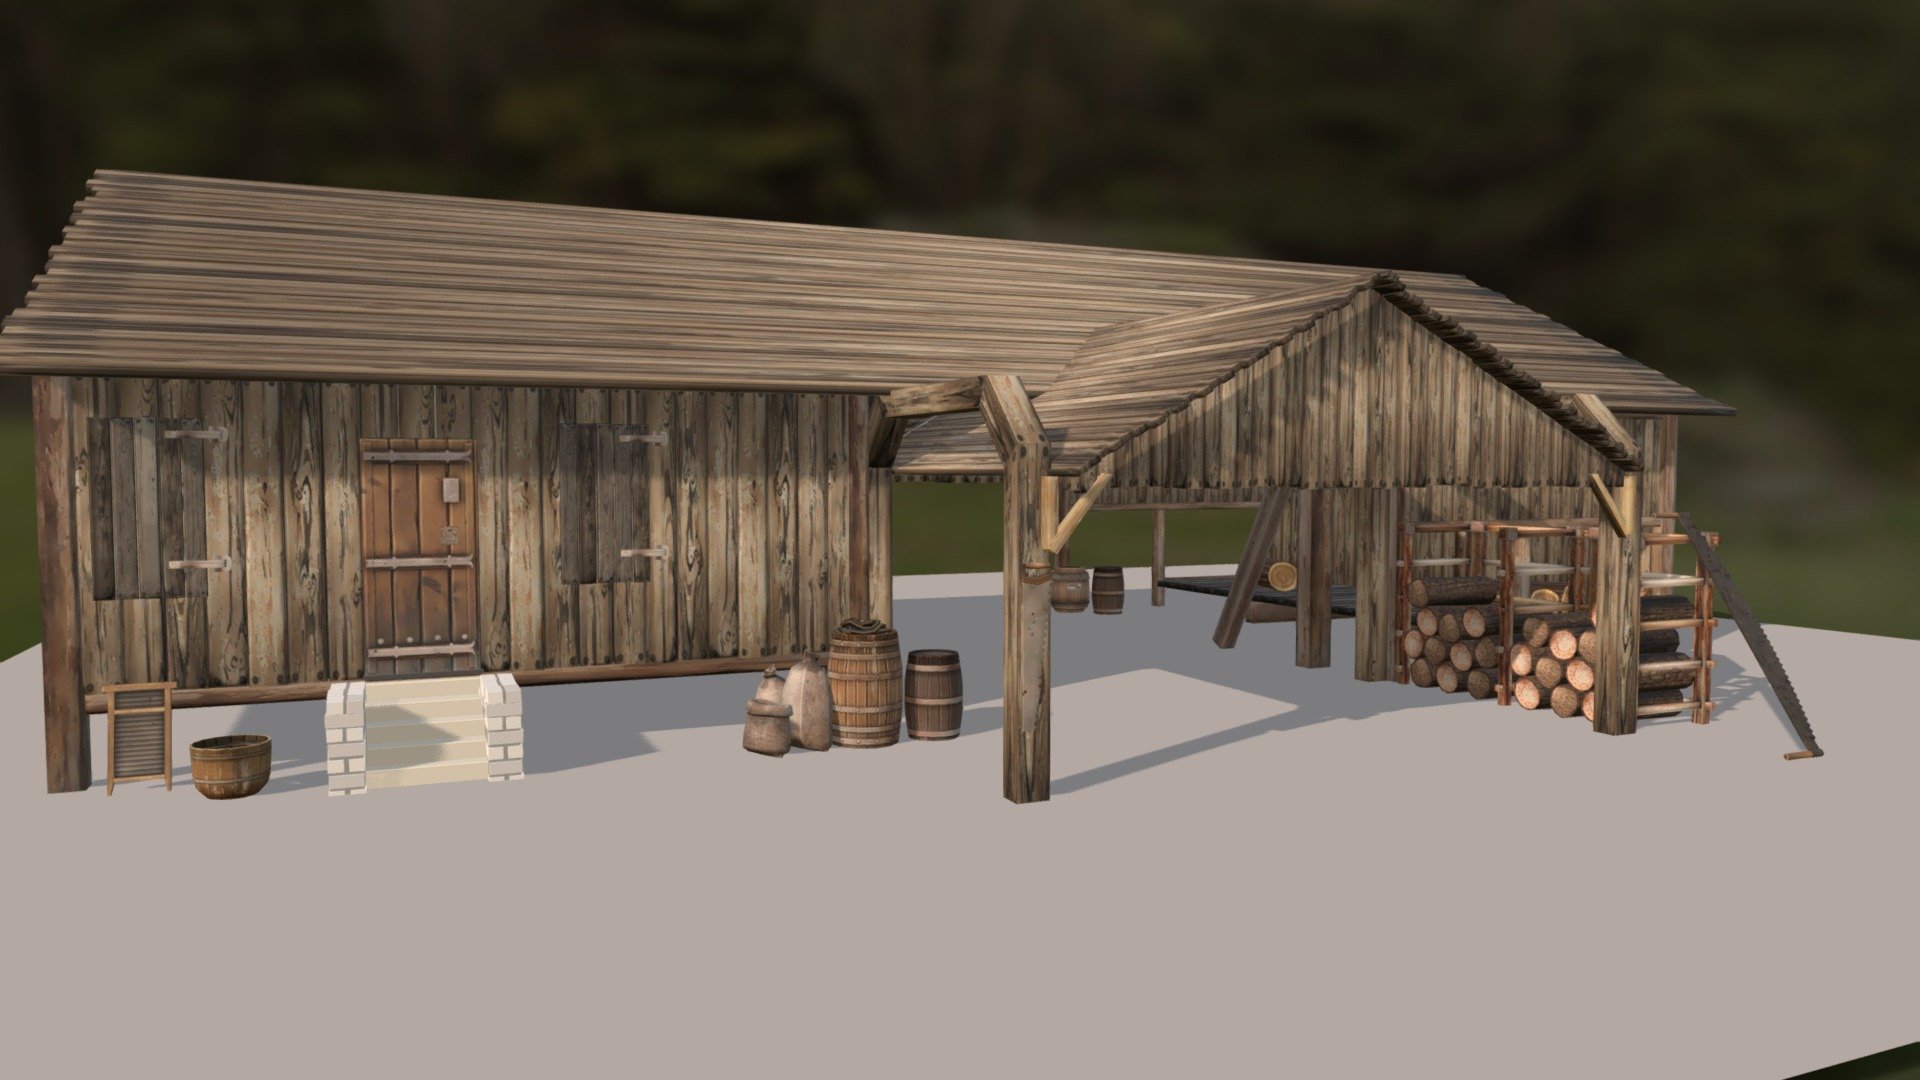 1860 Styled Lumber Mill.

Made for the Zora cultural heritage project 3d model